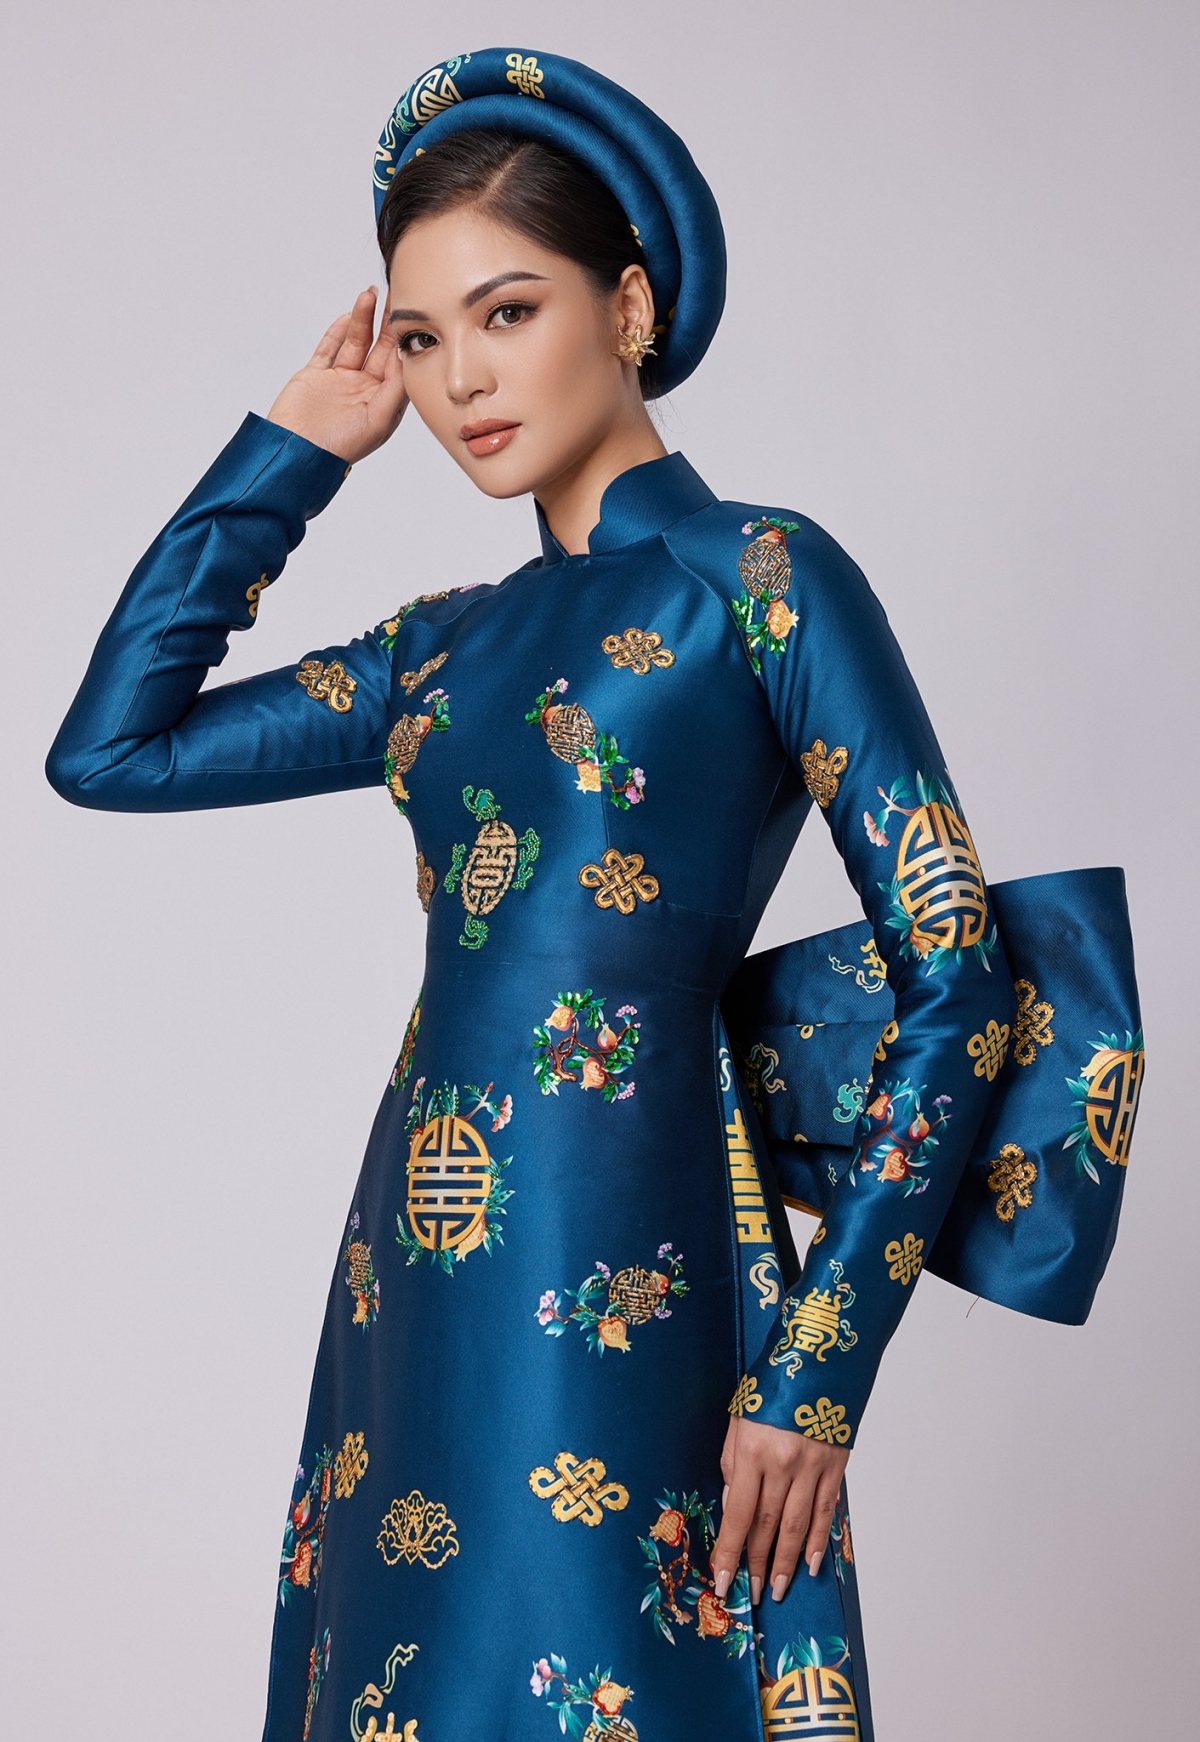 van anh introduces ao dai at miss earth 2021 picture 6